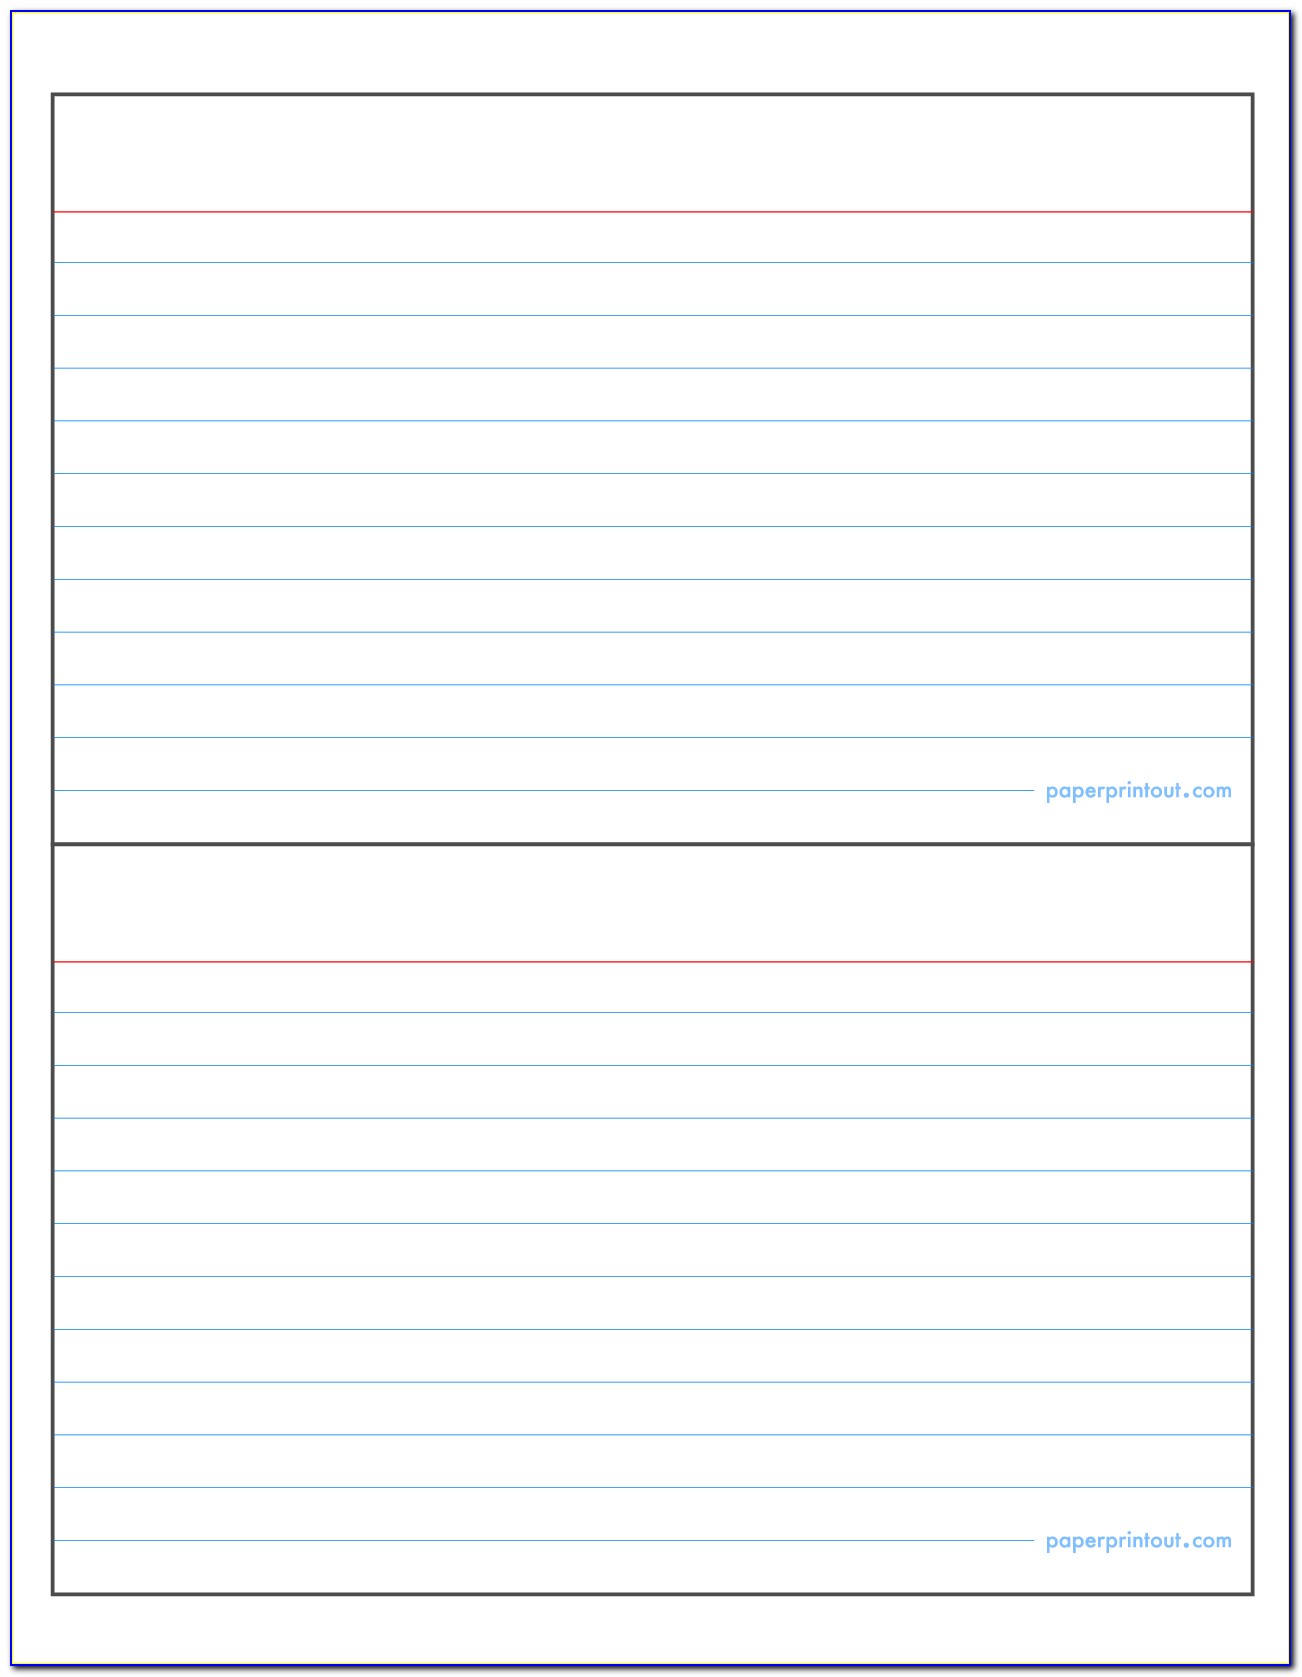 3x5 Index Card Template Publisher